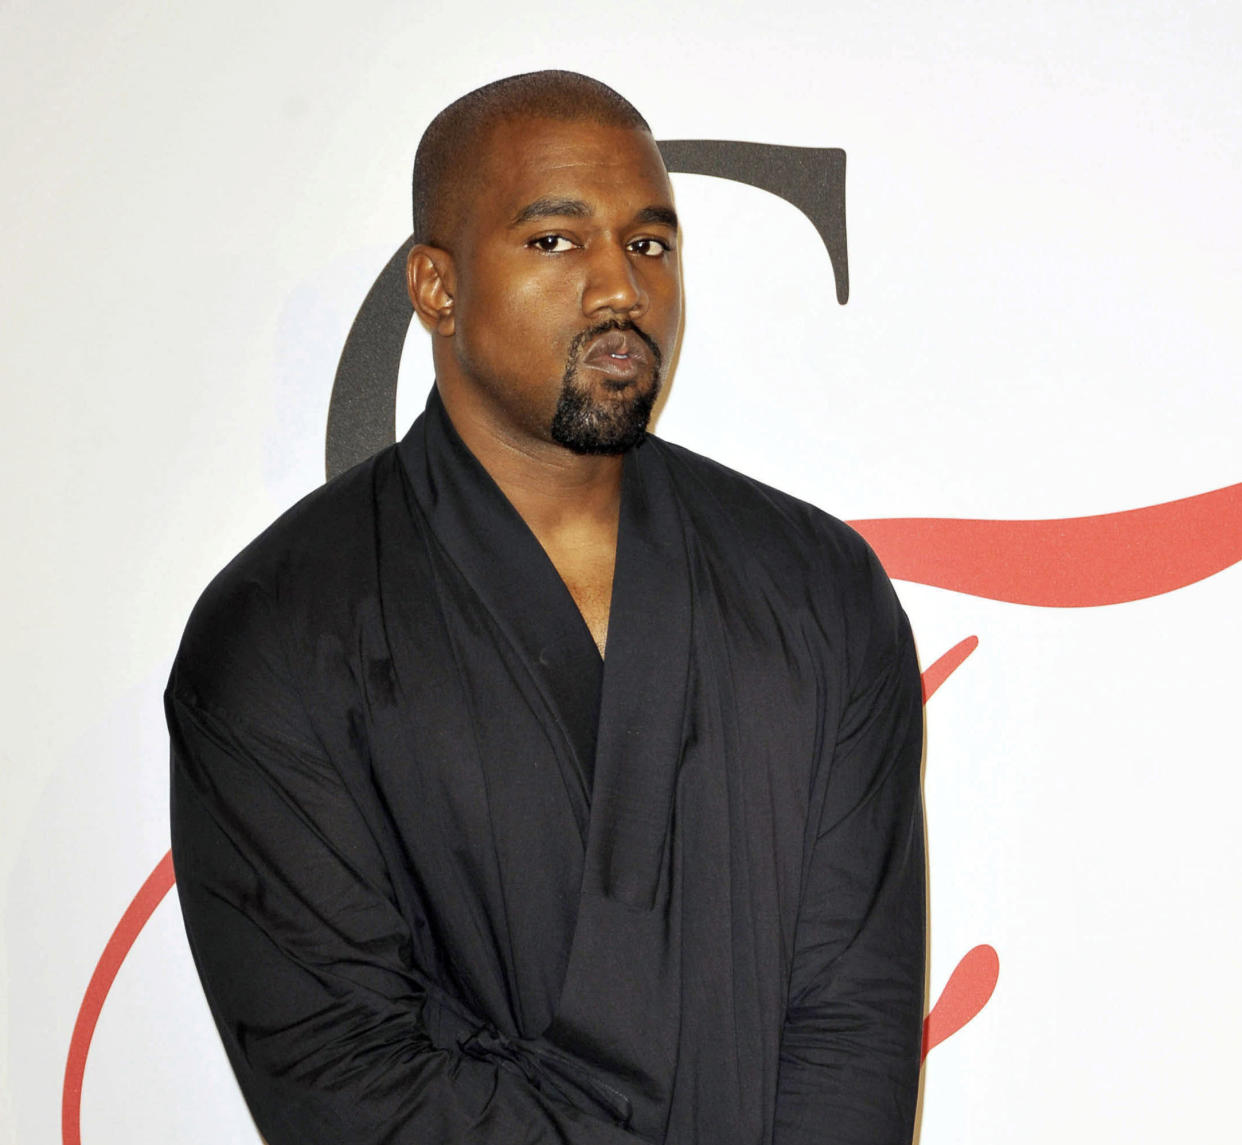 MARCH 16th 2022: Rapper Kanye West - also now known as Ye - suspended from Instagram for 24 hours after posting confrontational comments directed at television media personality Trevor Noah. - File Photo by: zz/Patricia Schlein/STAR MAX/IPx 2015 6/1/15 Kanye West at the 2015 CFDA Fashion Awards held on June 1, 2015 in New York City. (NYC)